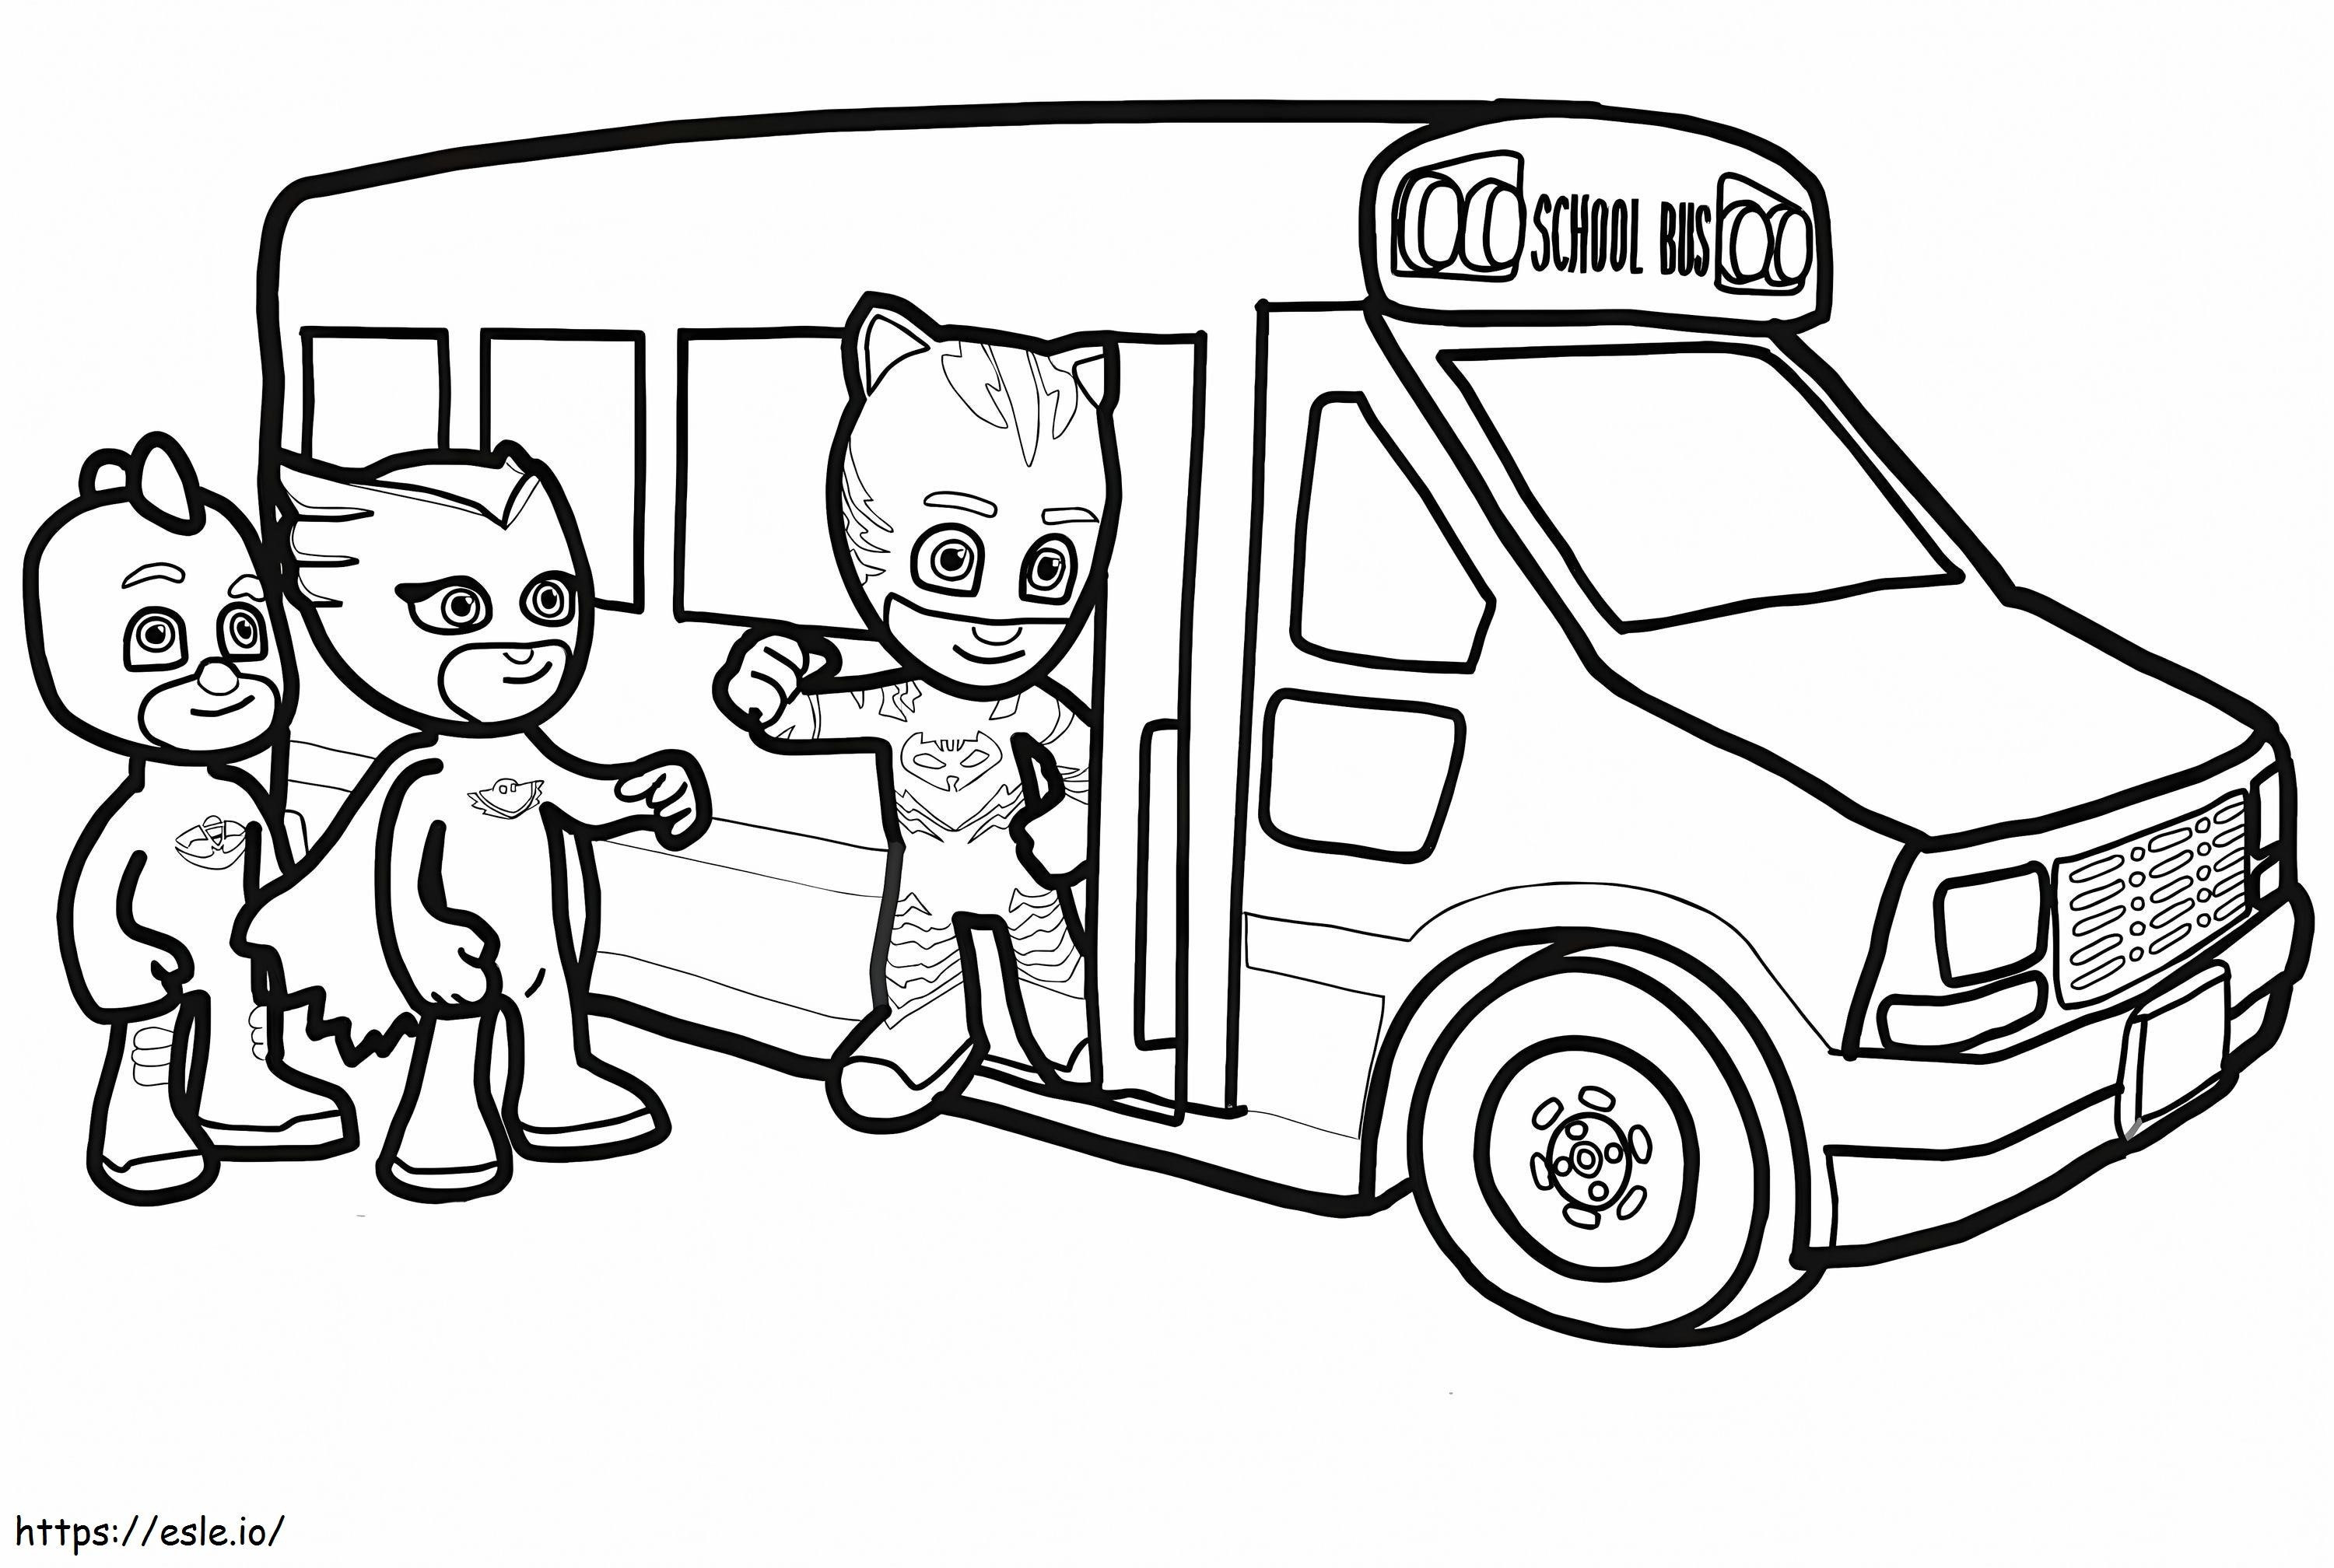 PJ Masks Go On The School Bus coloring page